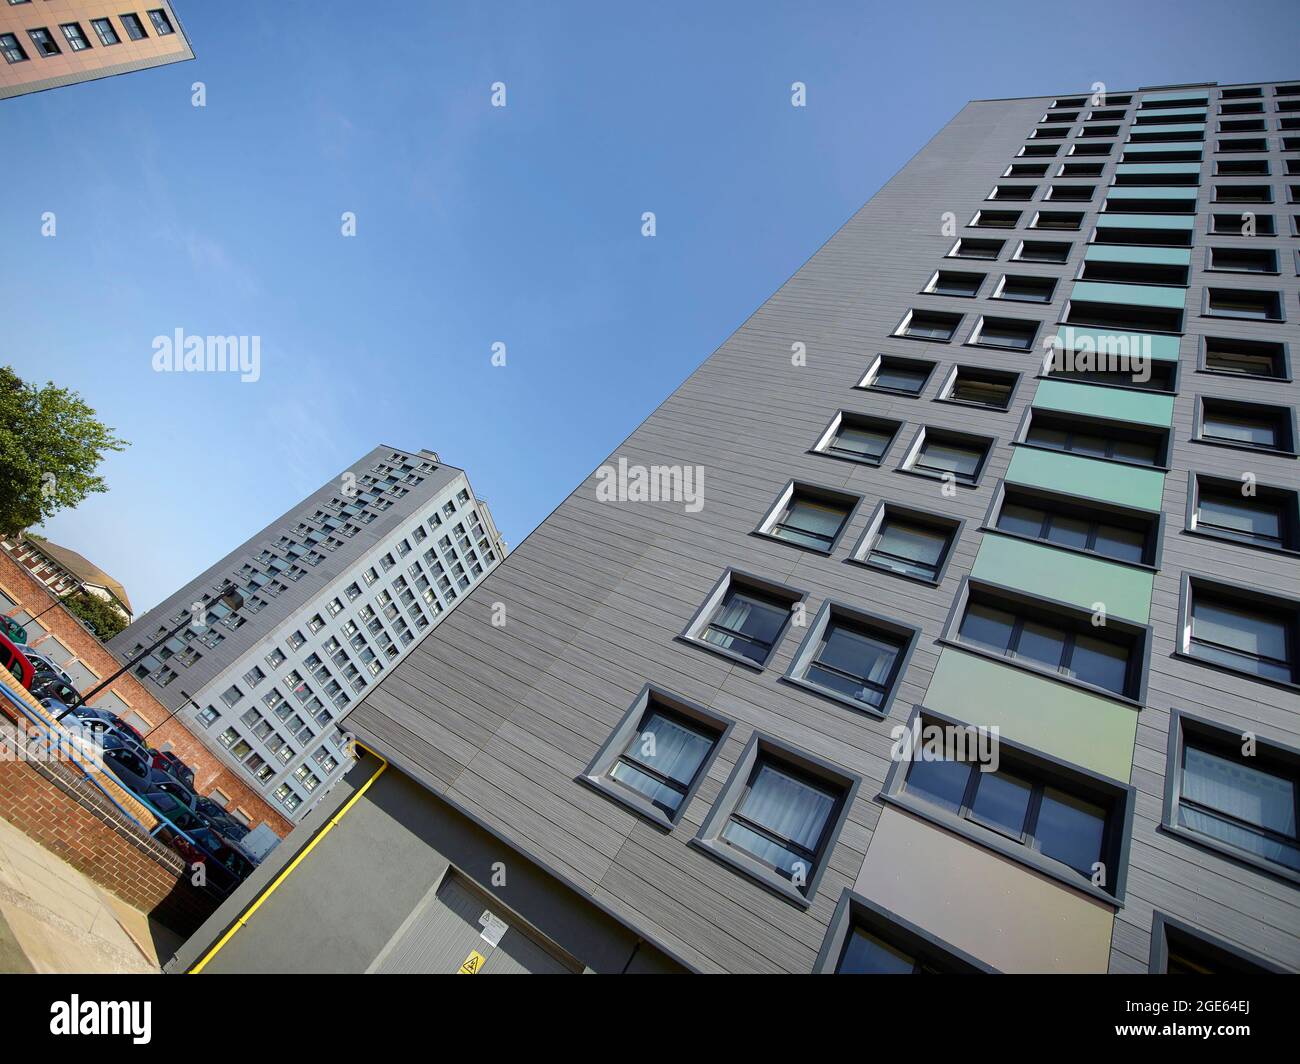 Re-clad high rises residential buildings, Stockport, Manchester, UK Stock Photo